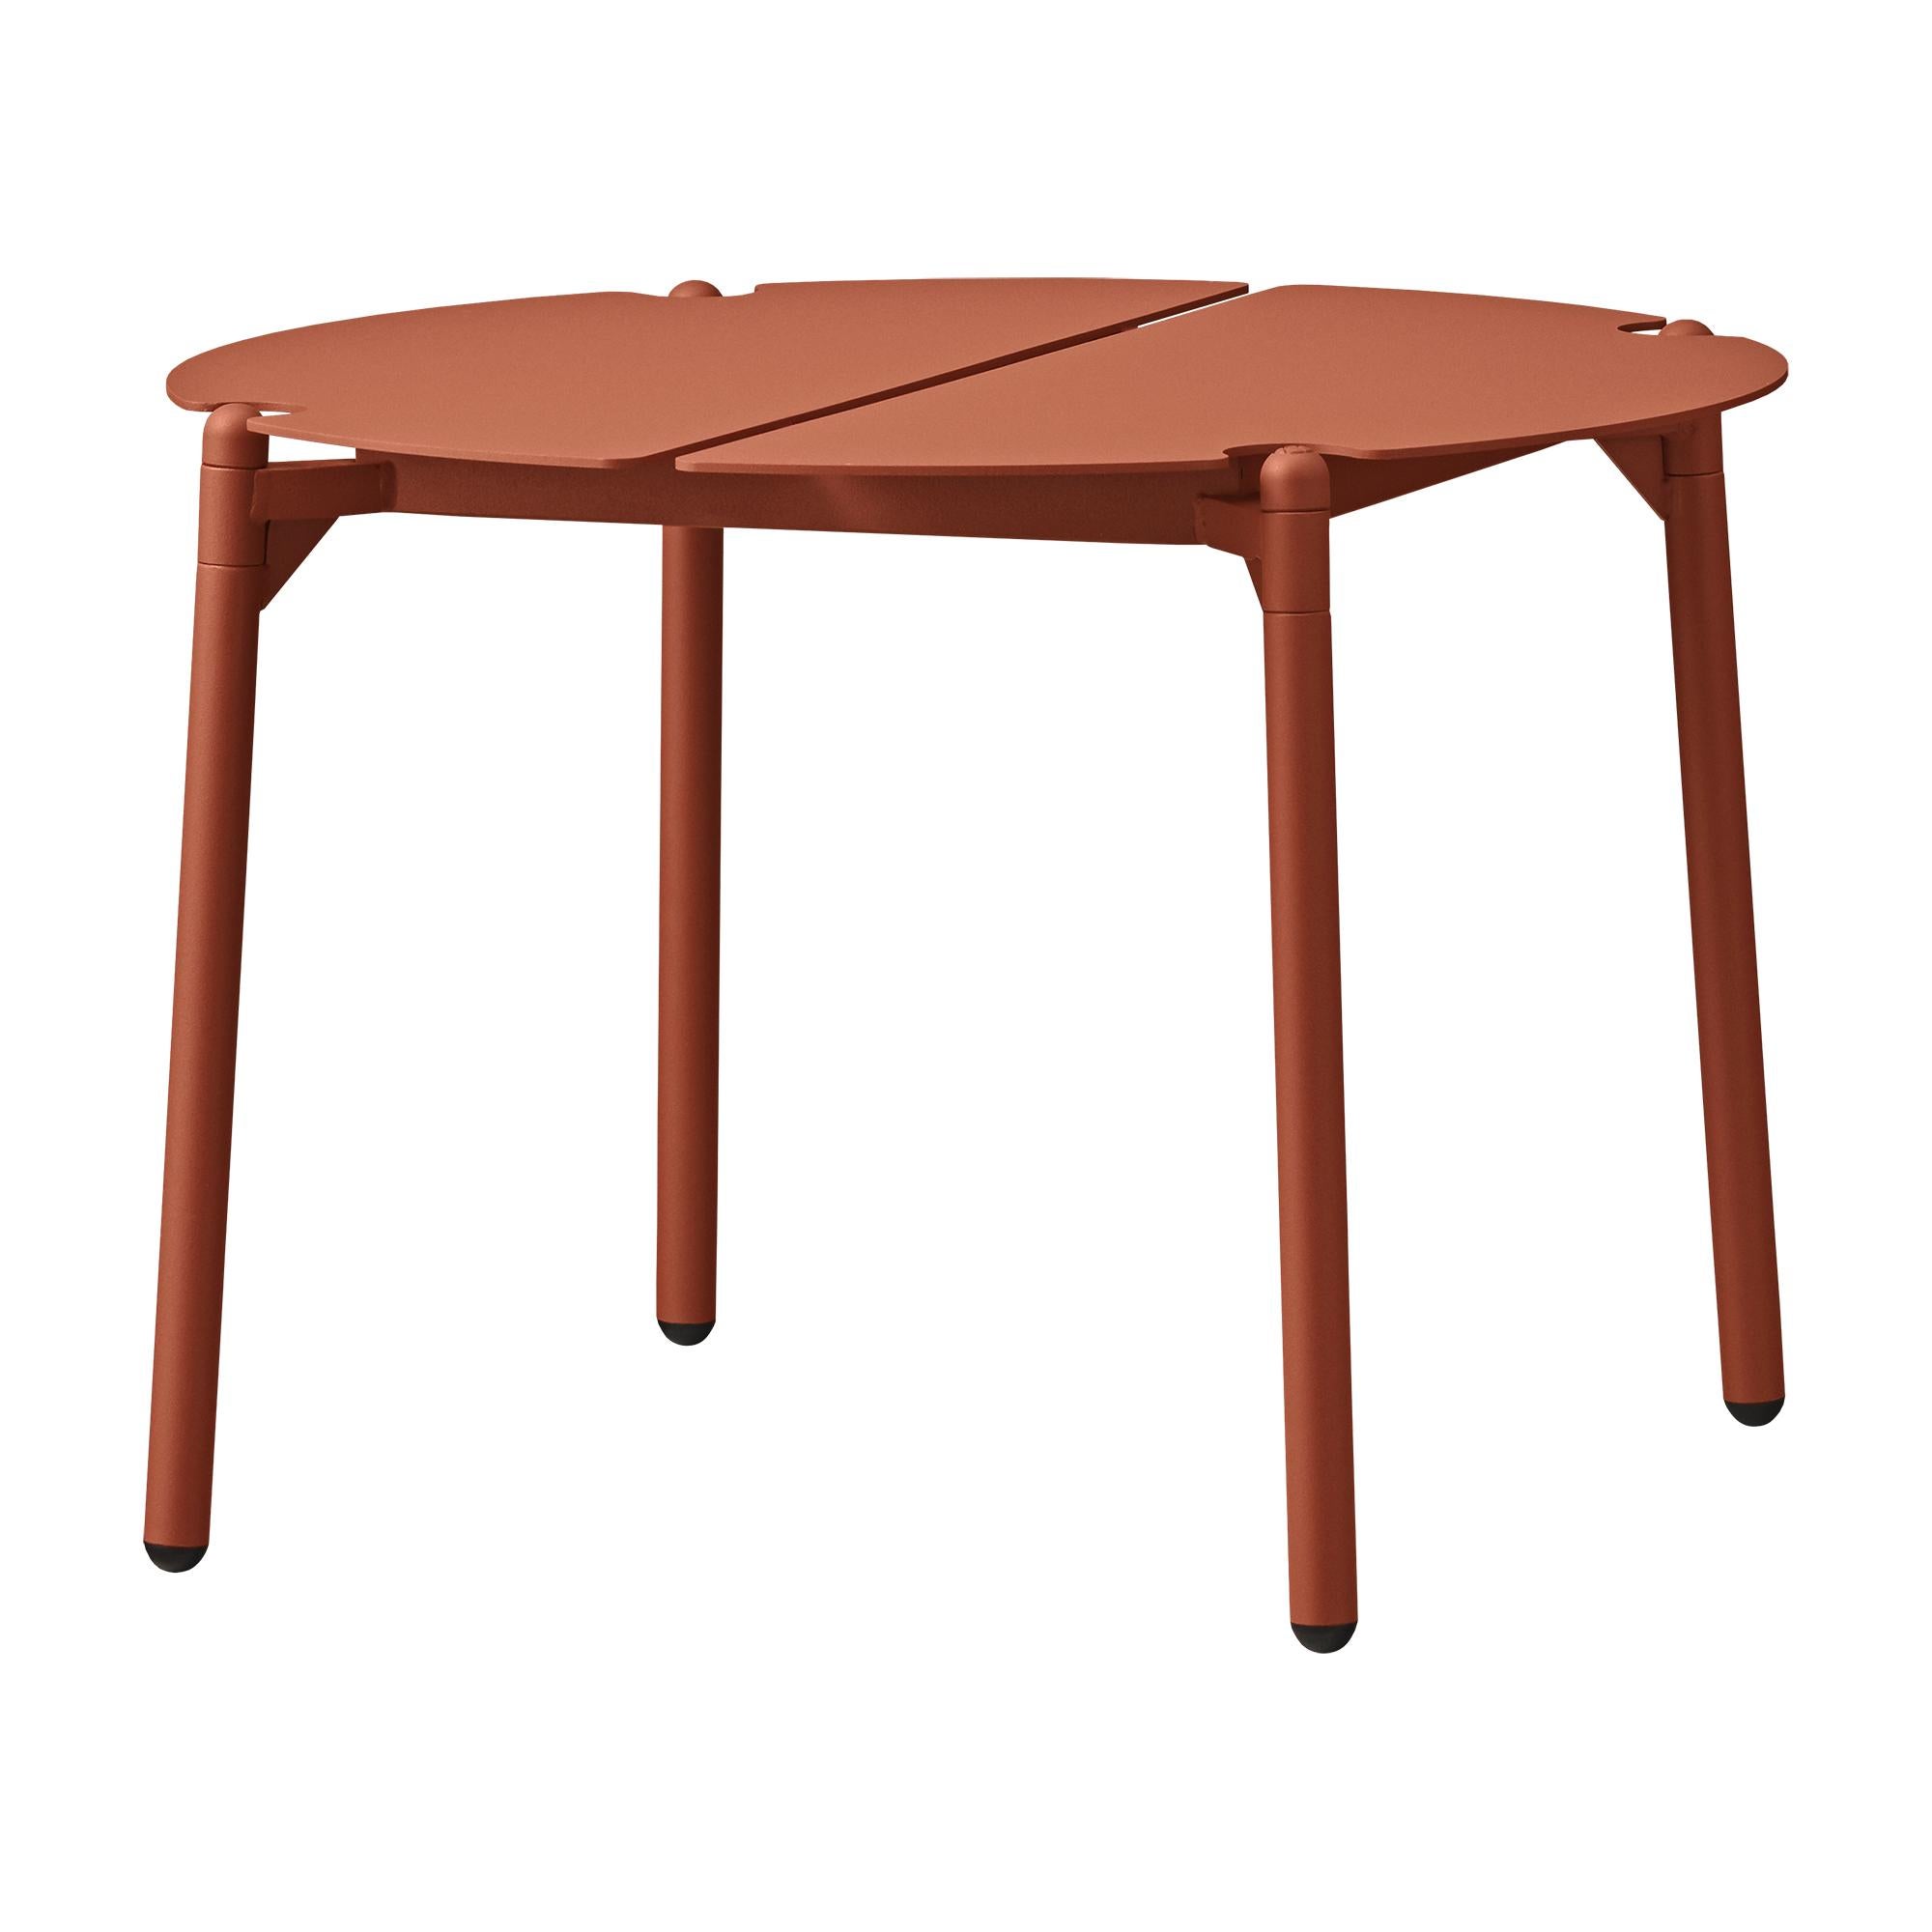 Small Ginger Bread Minimalist lounge table
Dimensions: Diameter 50 x H 35 cm 
Materials: Steel w. Matte Powder Coating & Aluminum w. Matte Powder Coating.
Available in colors: Taupe, Bordeaux, Forest, Ginger Bread, Black and, Black and Gold.